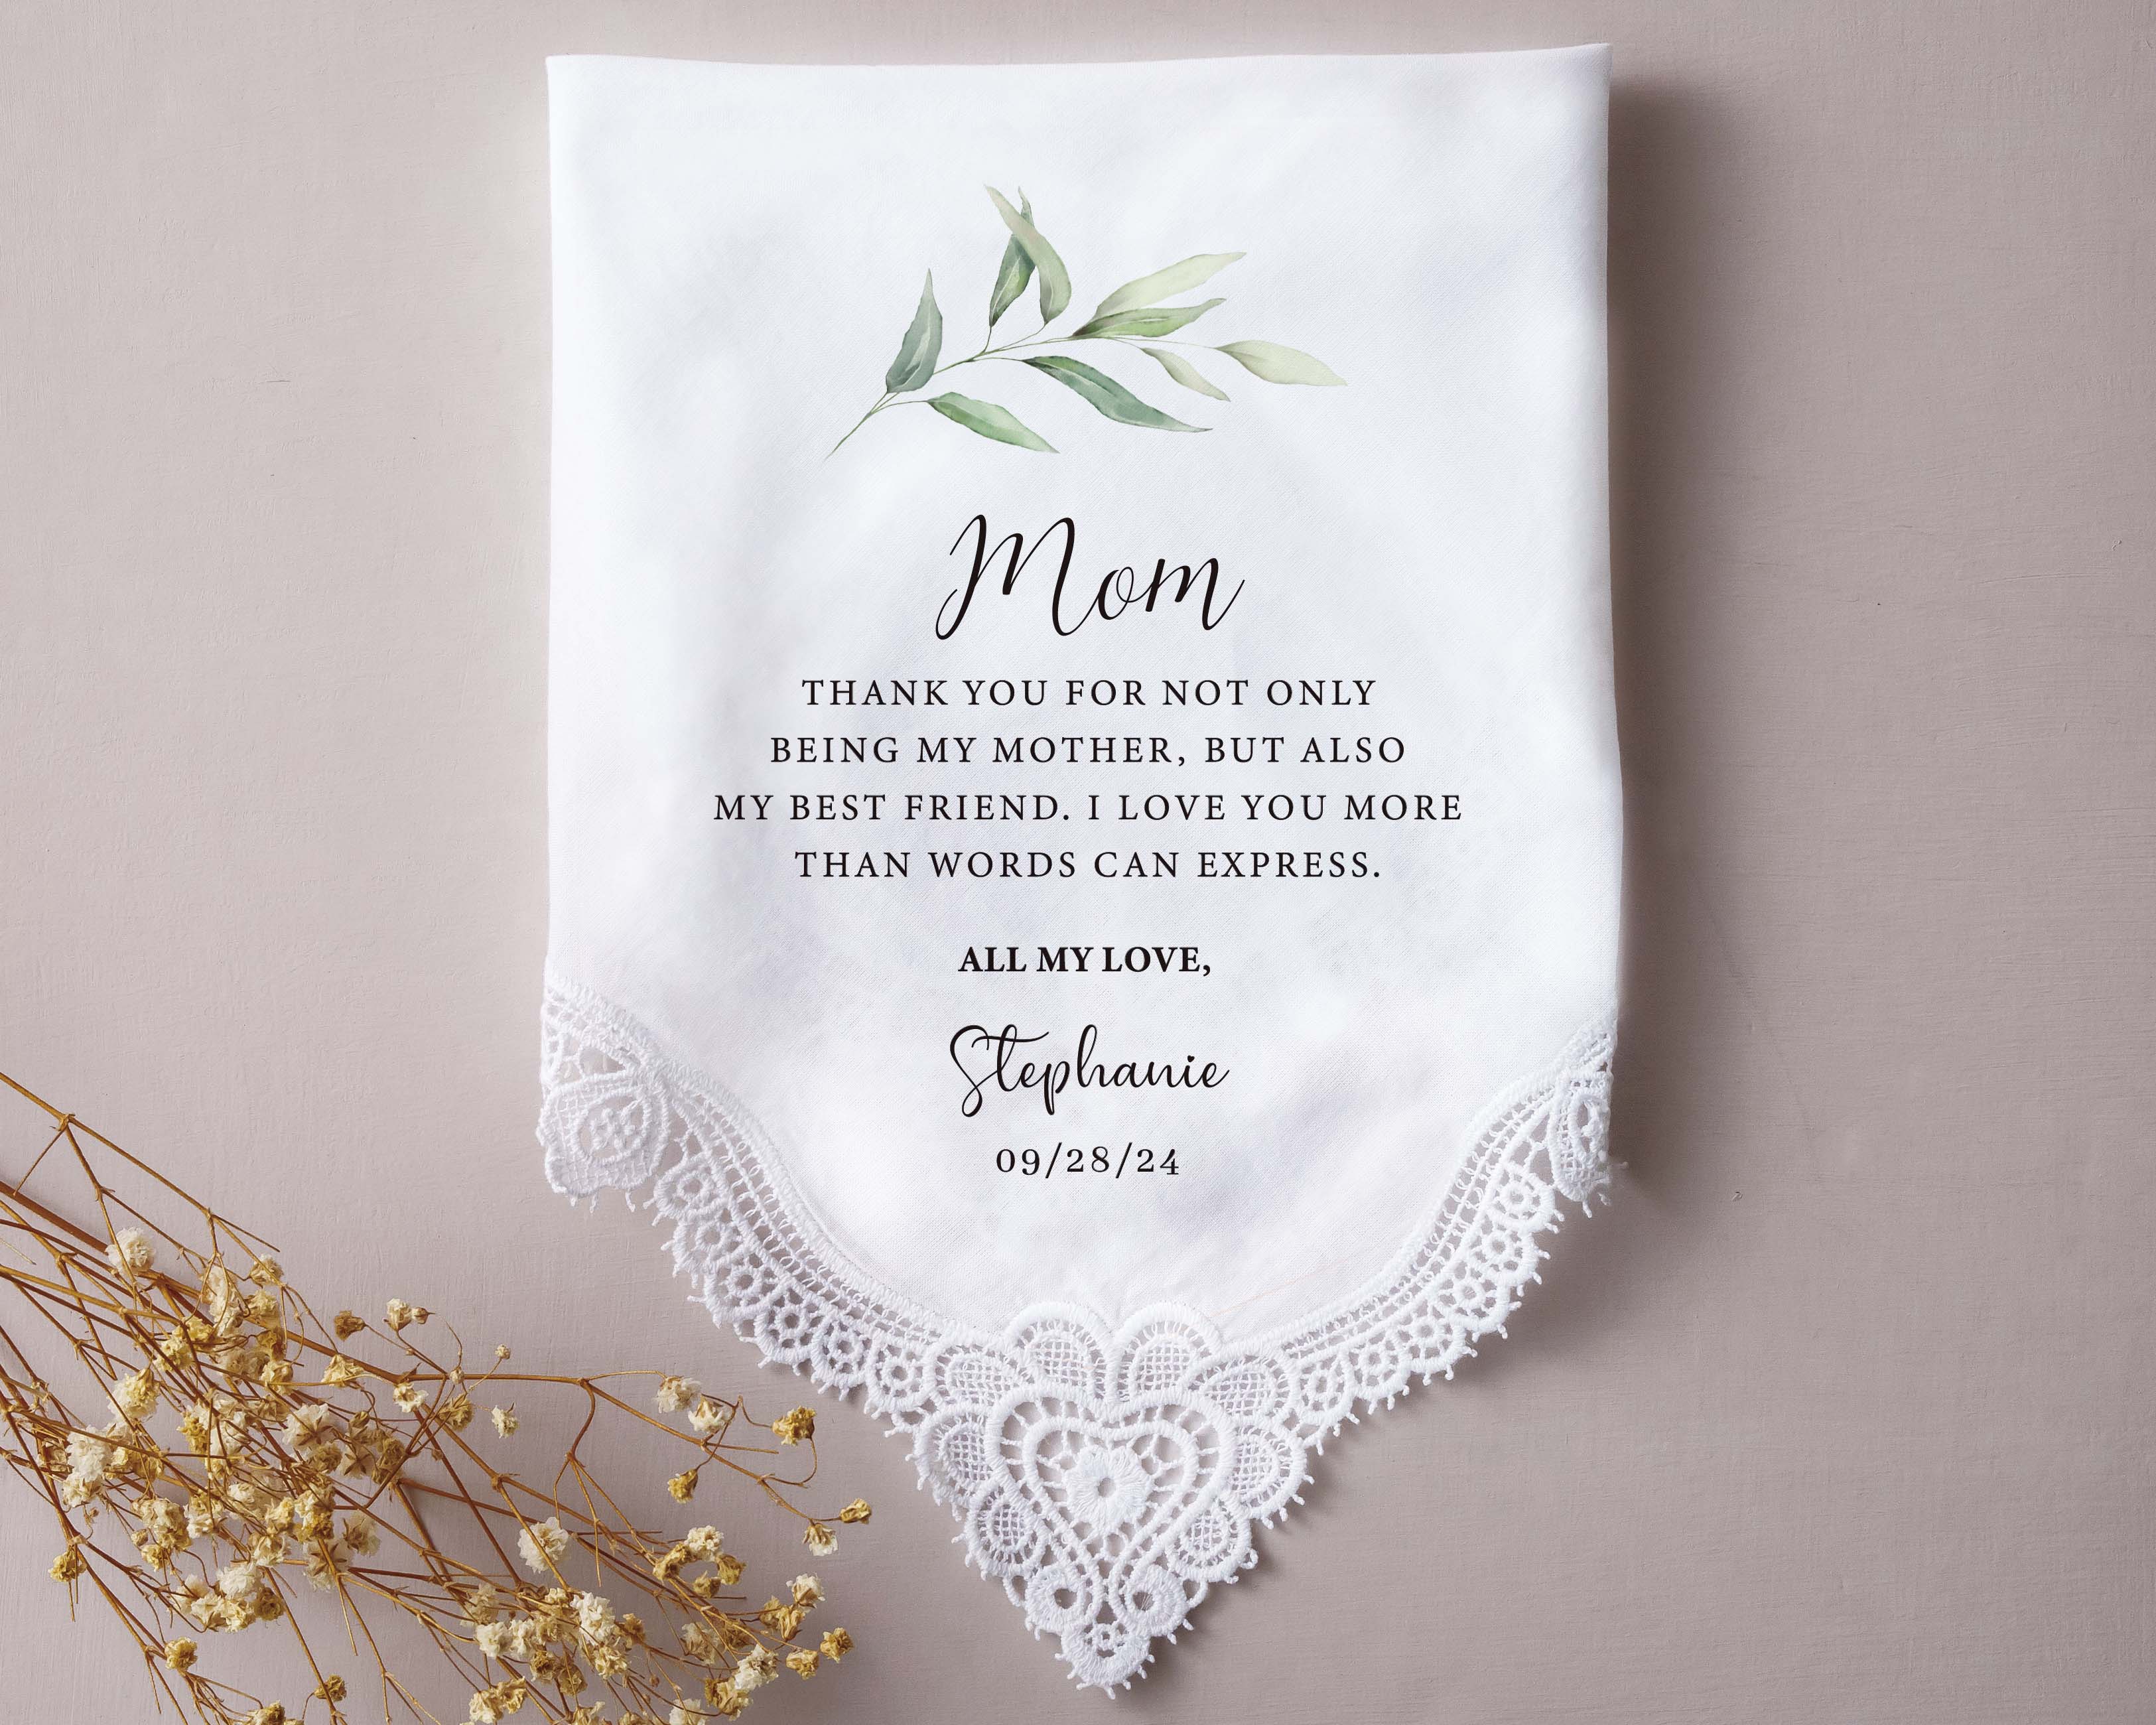 Personalized Embroidery Cotton Handkerchief